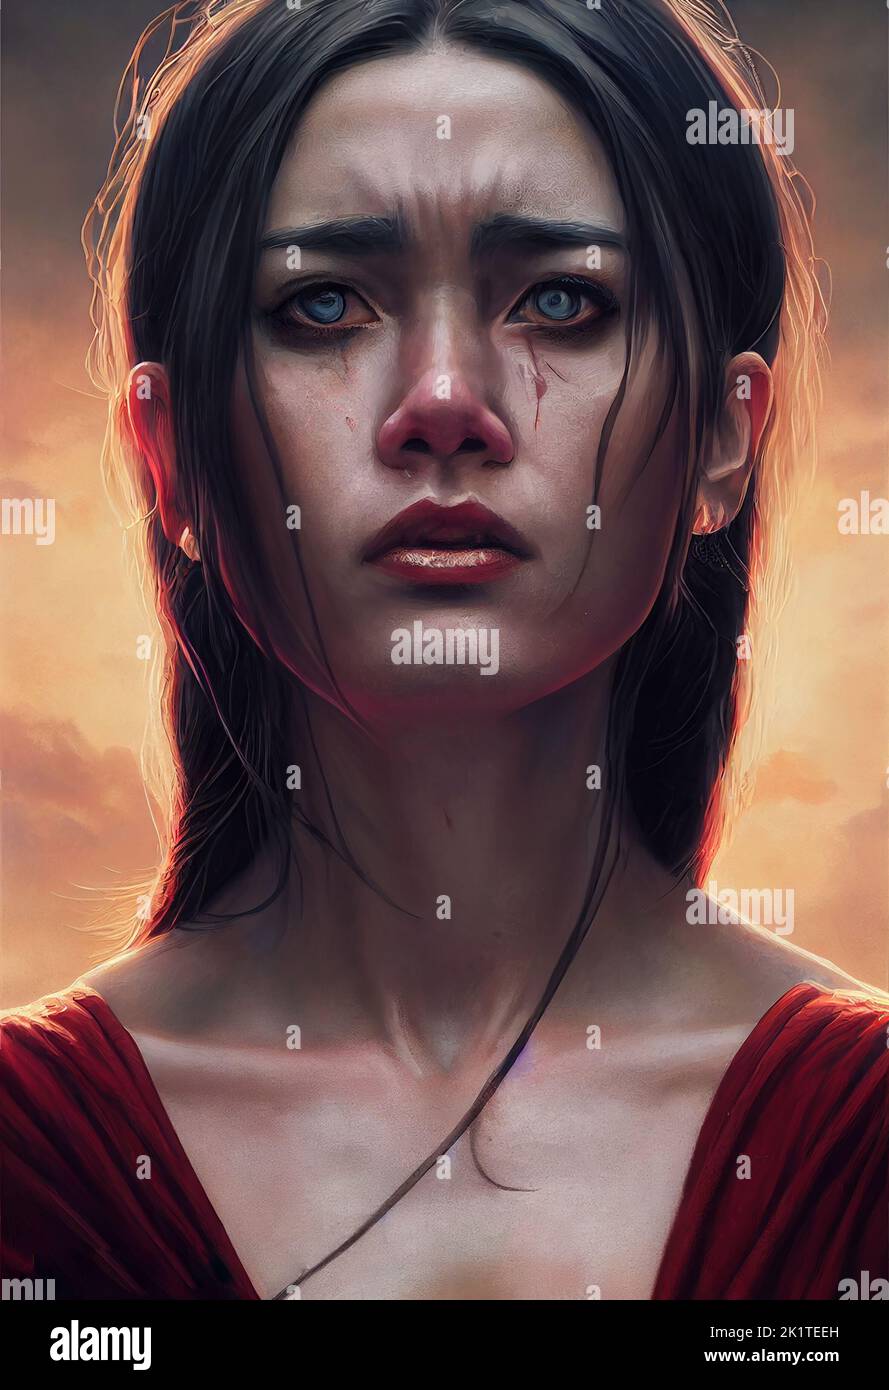 A 3D render of a young fantasy princess with a teary-eyed and bloodied face after a lost battle Stock Photo